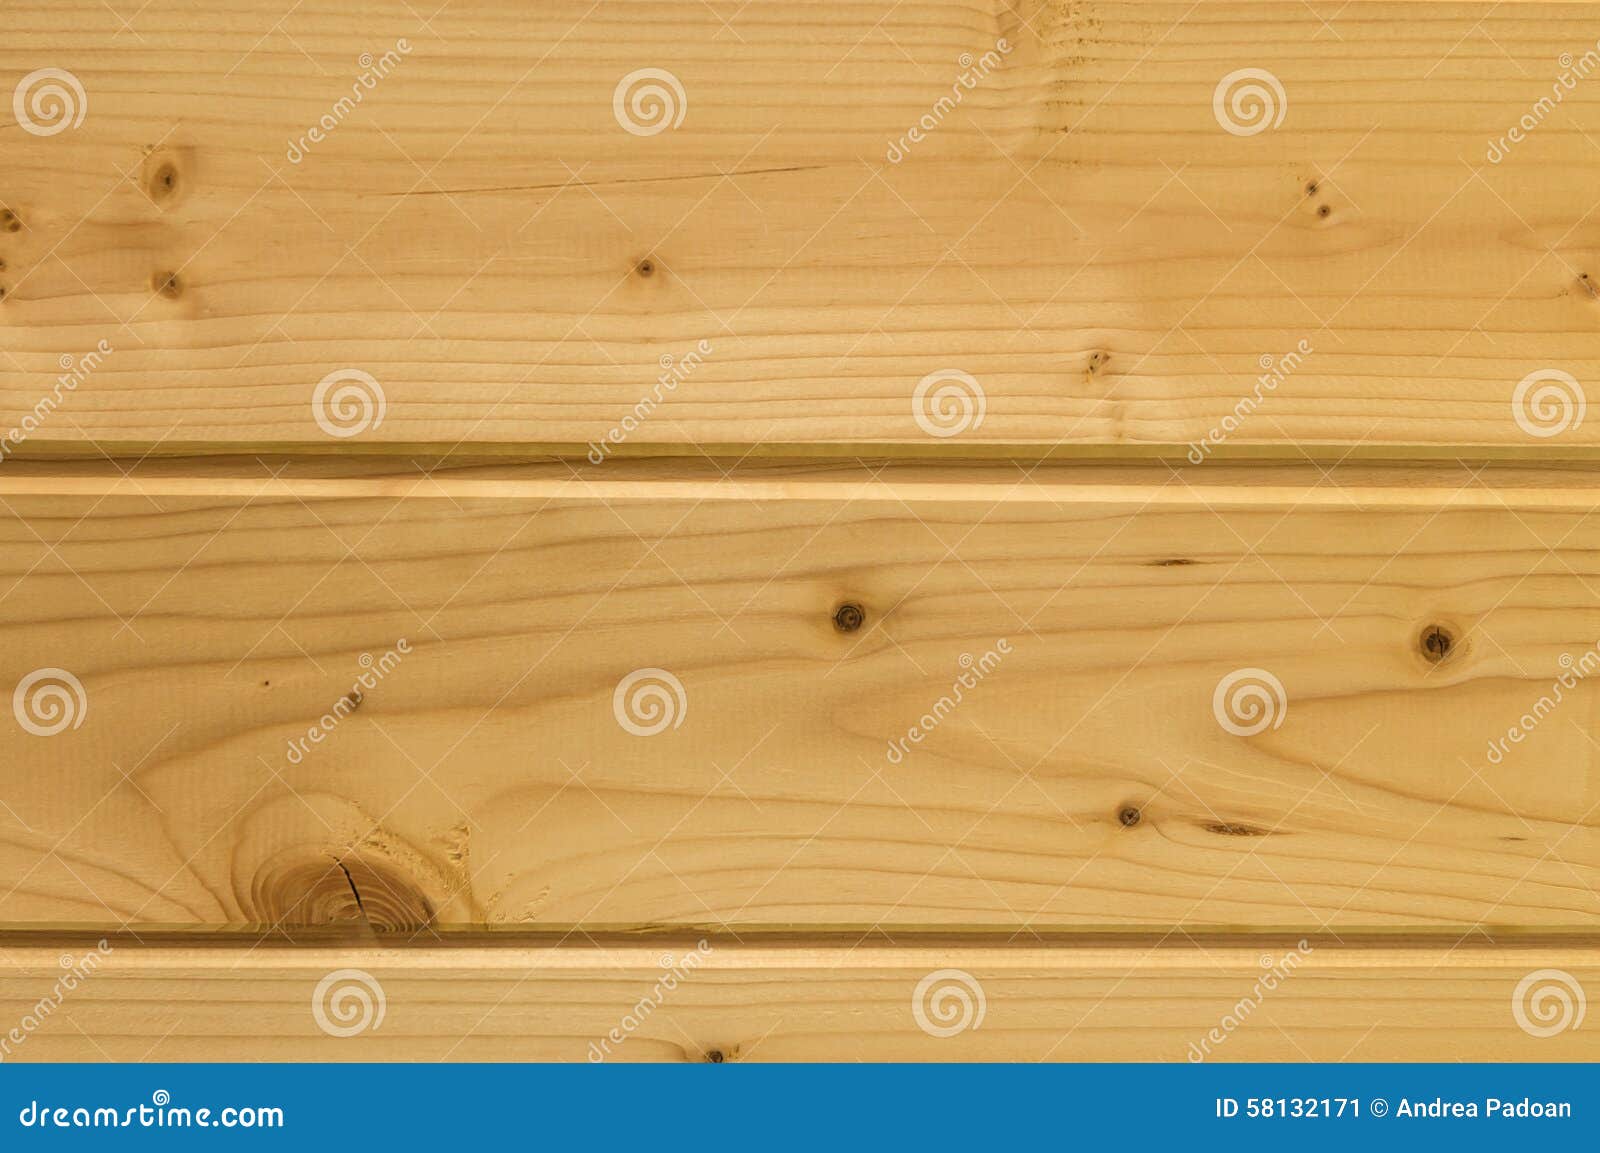 Pinewood Ceiling Matchboards Stock Image Image Of